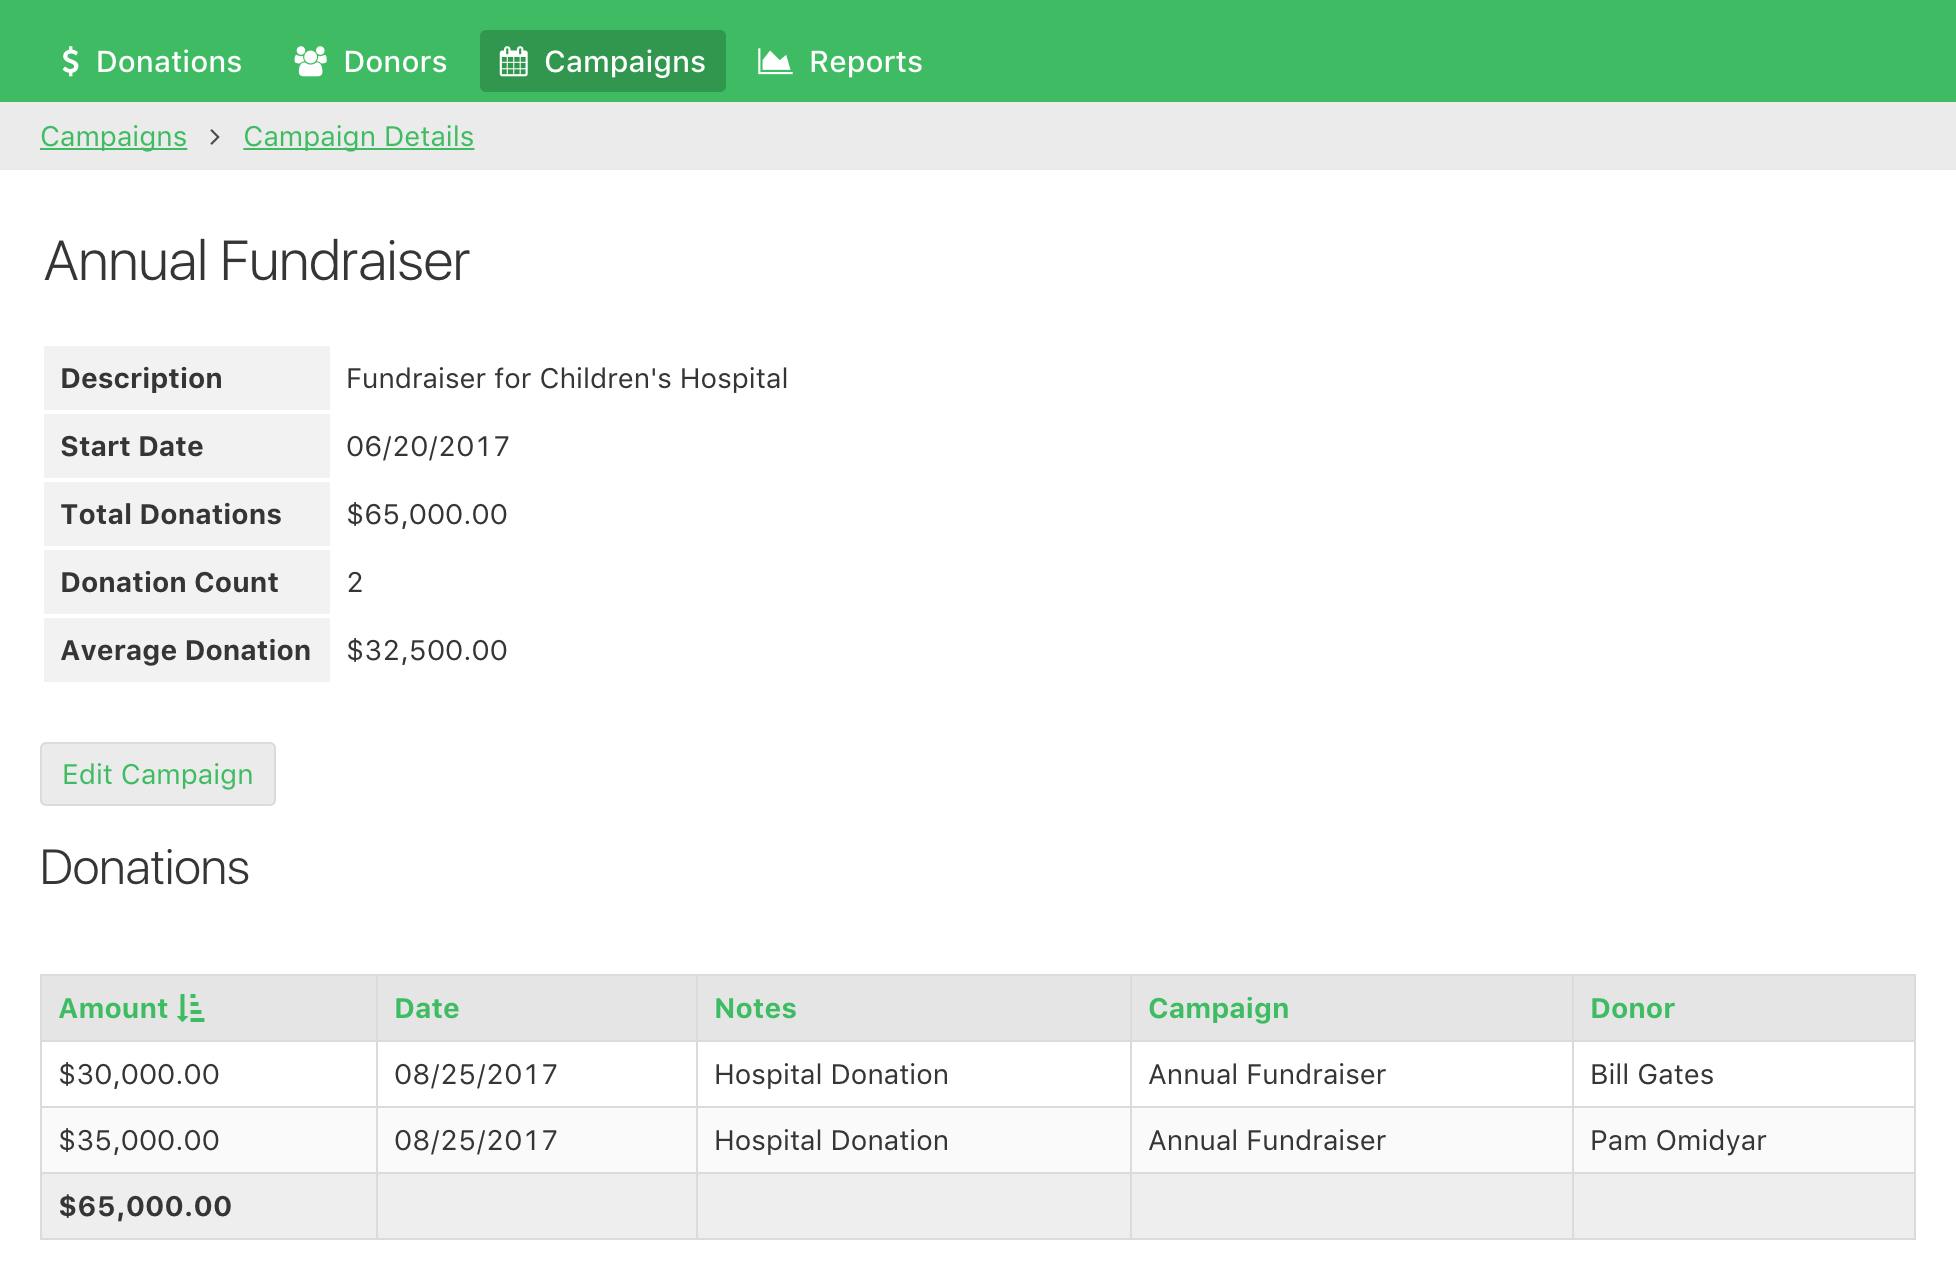 Track campaigns and donation totals. Click on a campaign to add donations and view donation history.